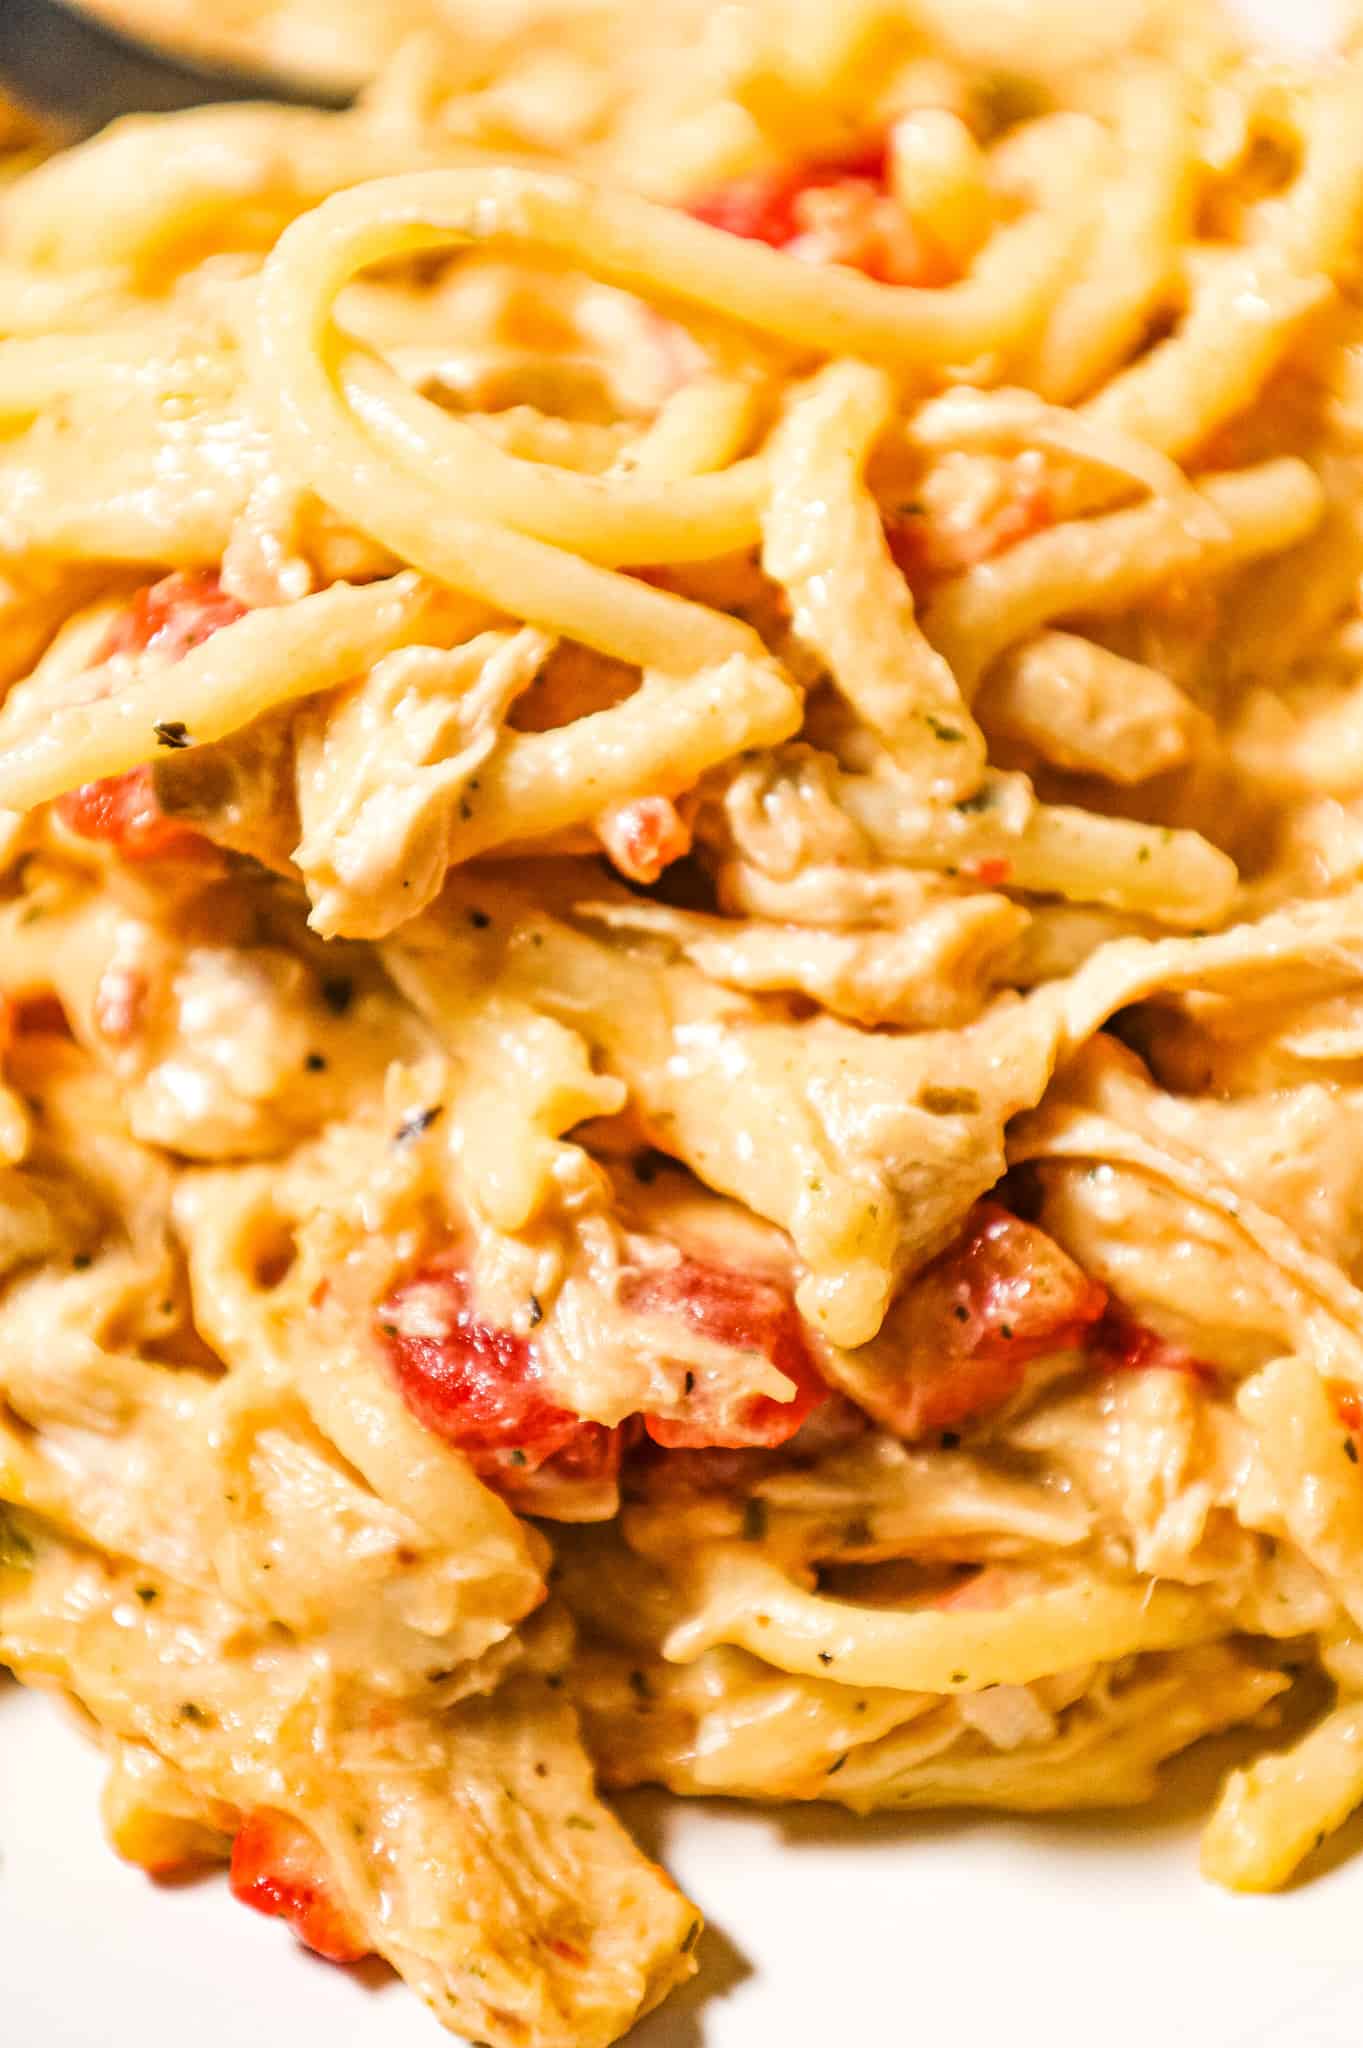 Crock Pot Chicken Spaghetti is a hearty slow cooker pasta recipe made with boneless, skinless chicken breasts cooked in a cream soup and cream cheese mixture and loaded with shredded cheese.